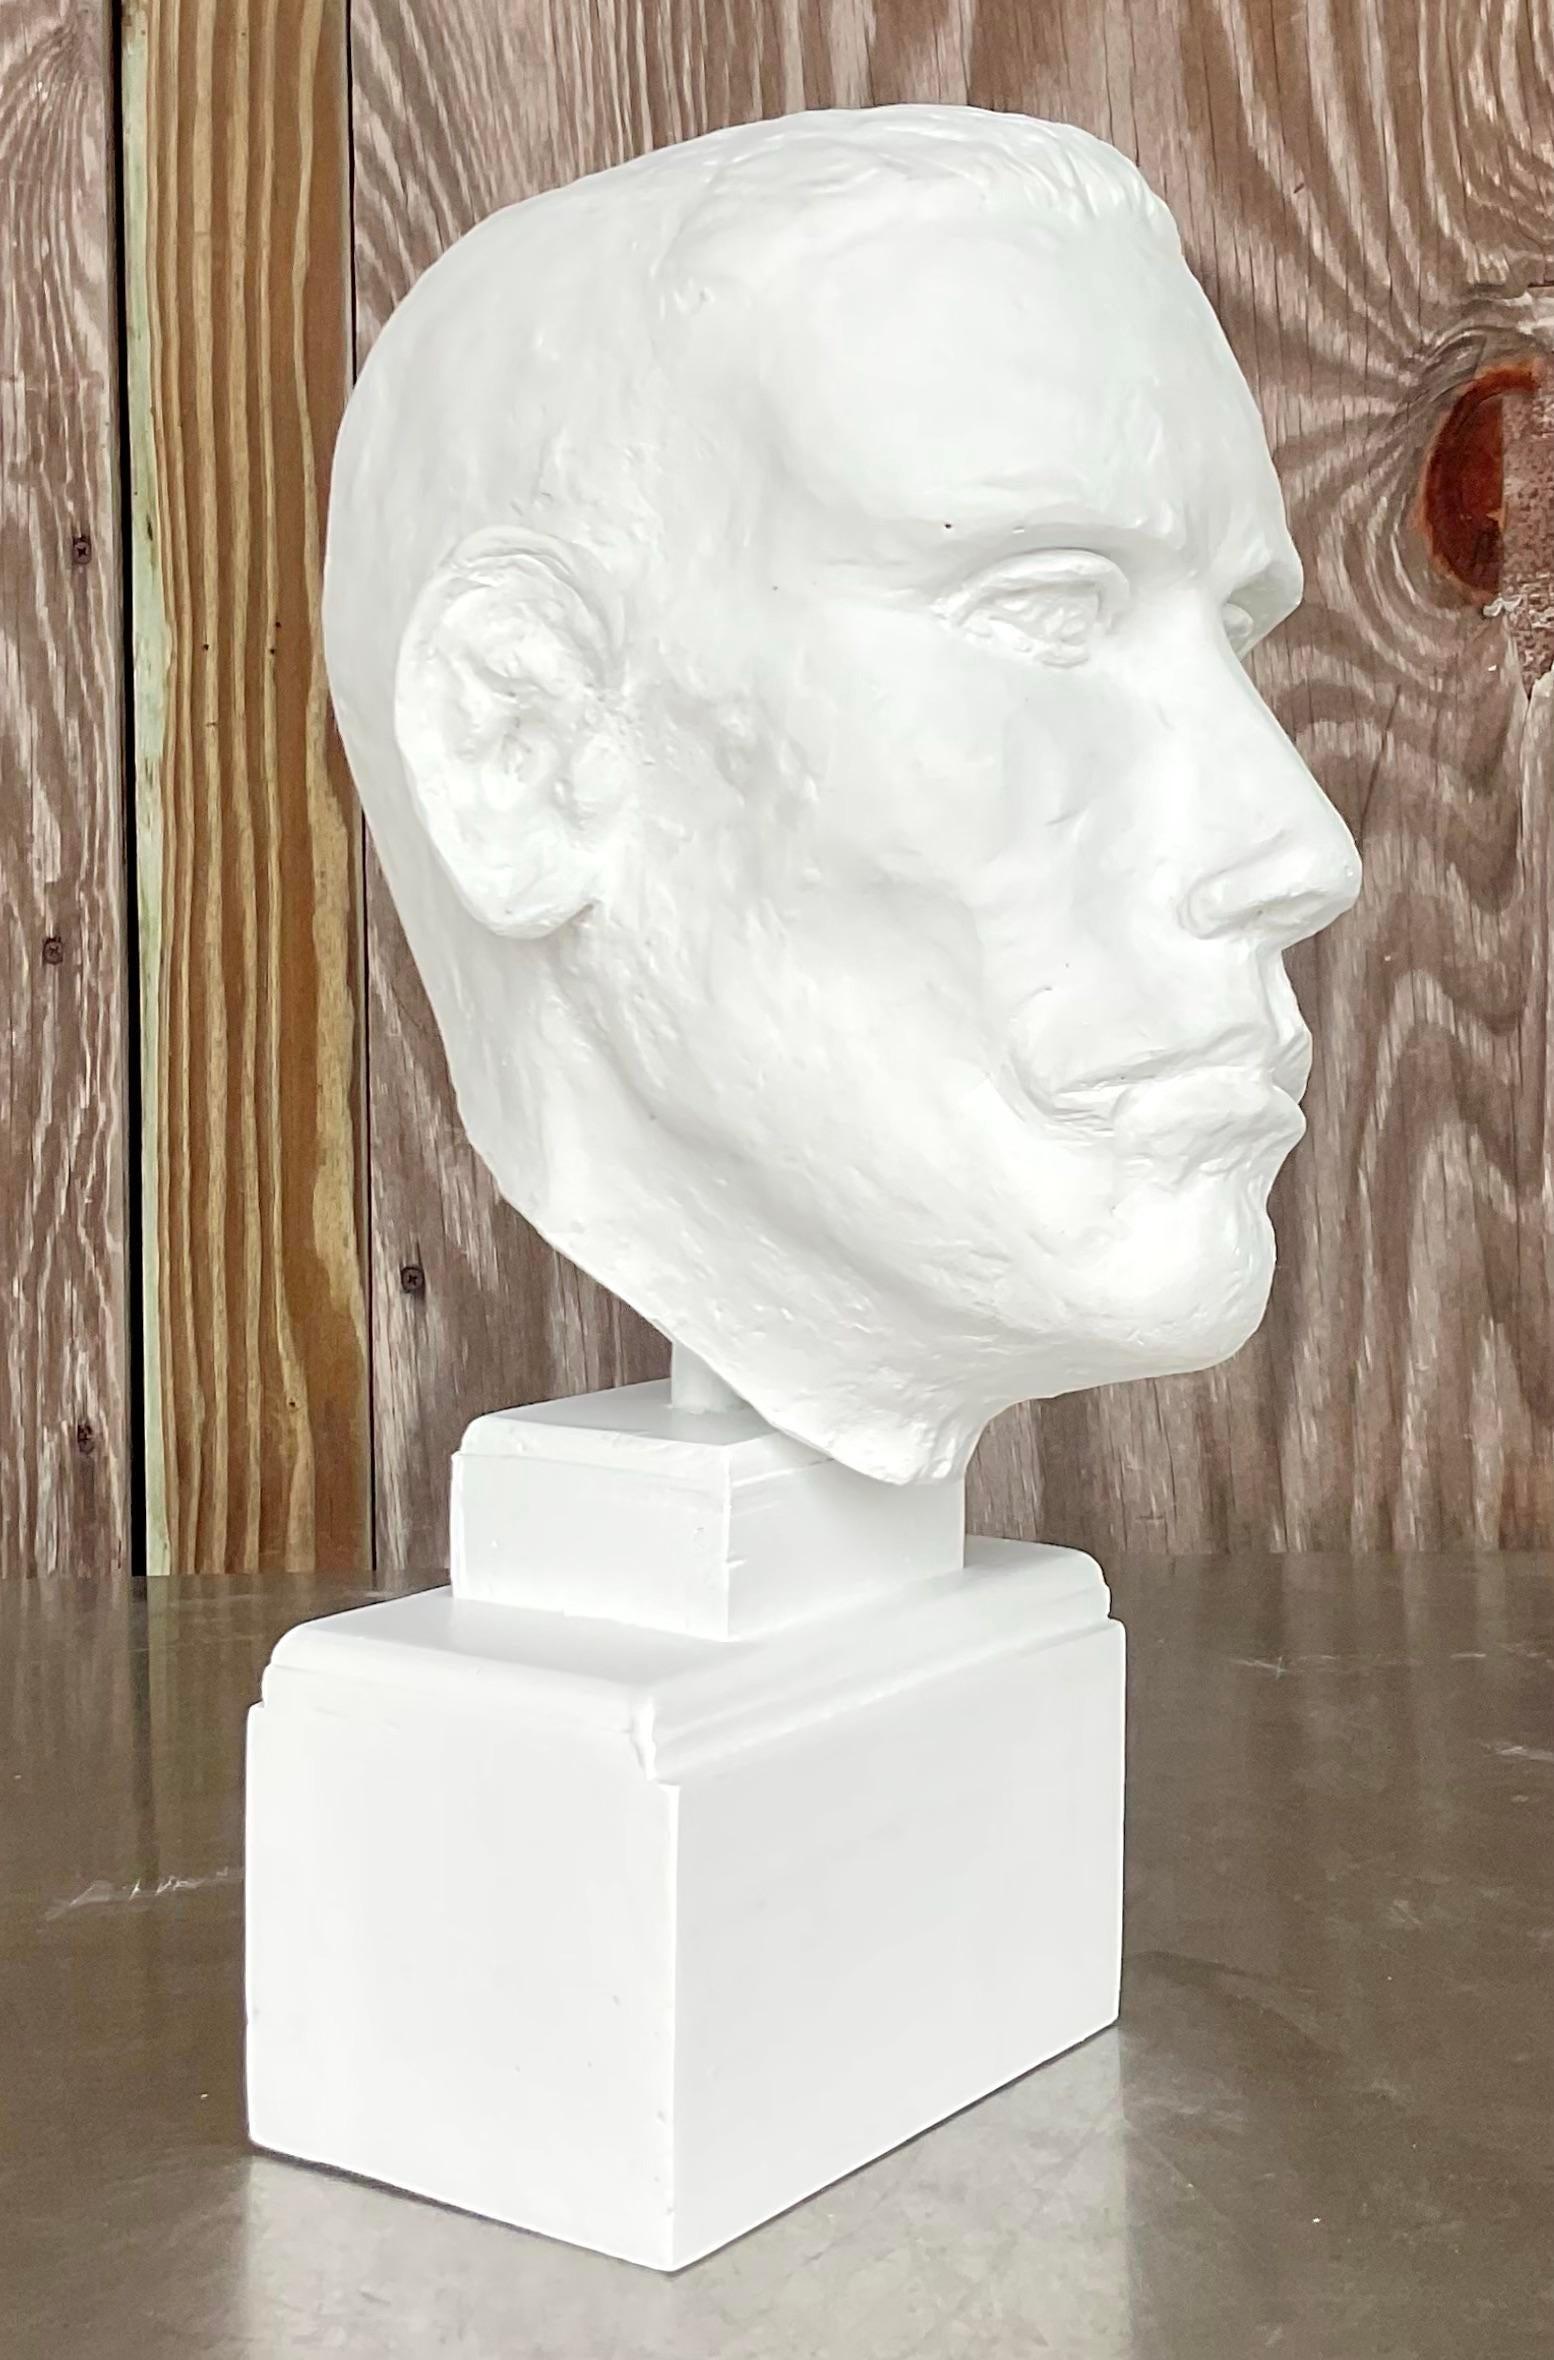 Add a dash of artistic flair to your décor with our Vintage Boho Plaster Bust of Man. This captivating piece captures the essence of American bohemian style, blending rustic charm with eclectic sophistication. Crafted with intricate detail, it